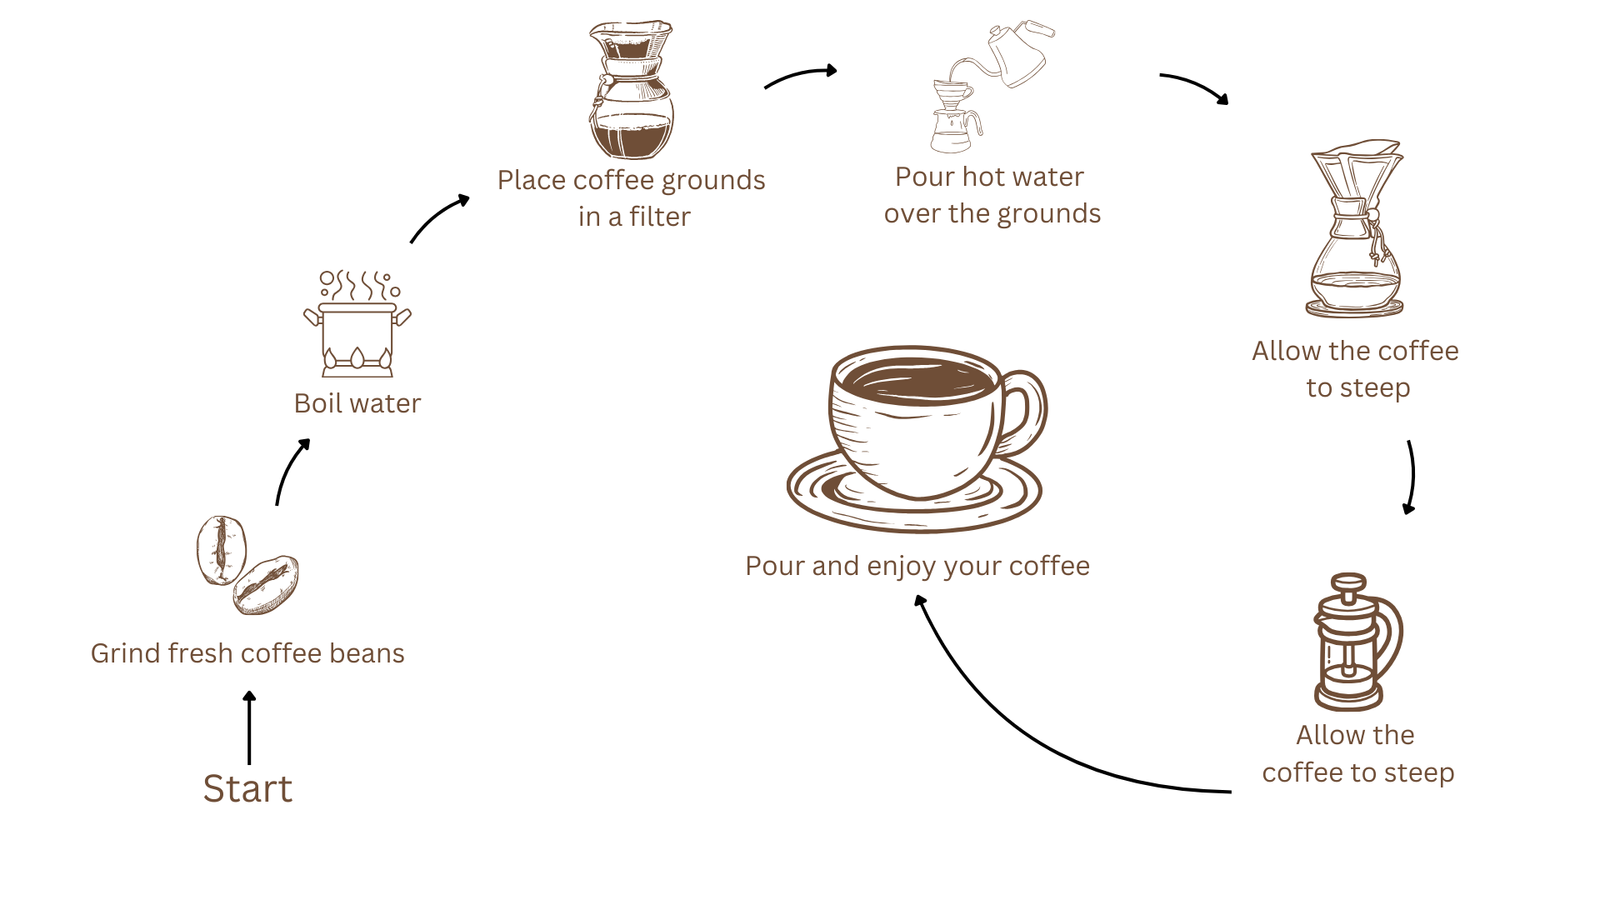 The simplest process to make a cup of coffee